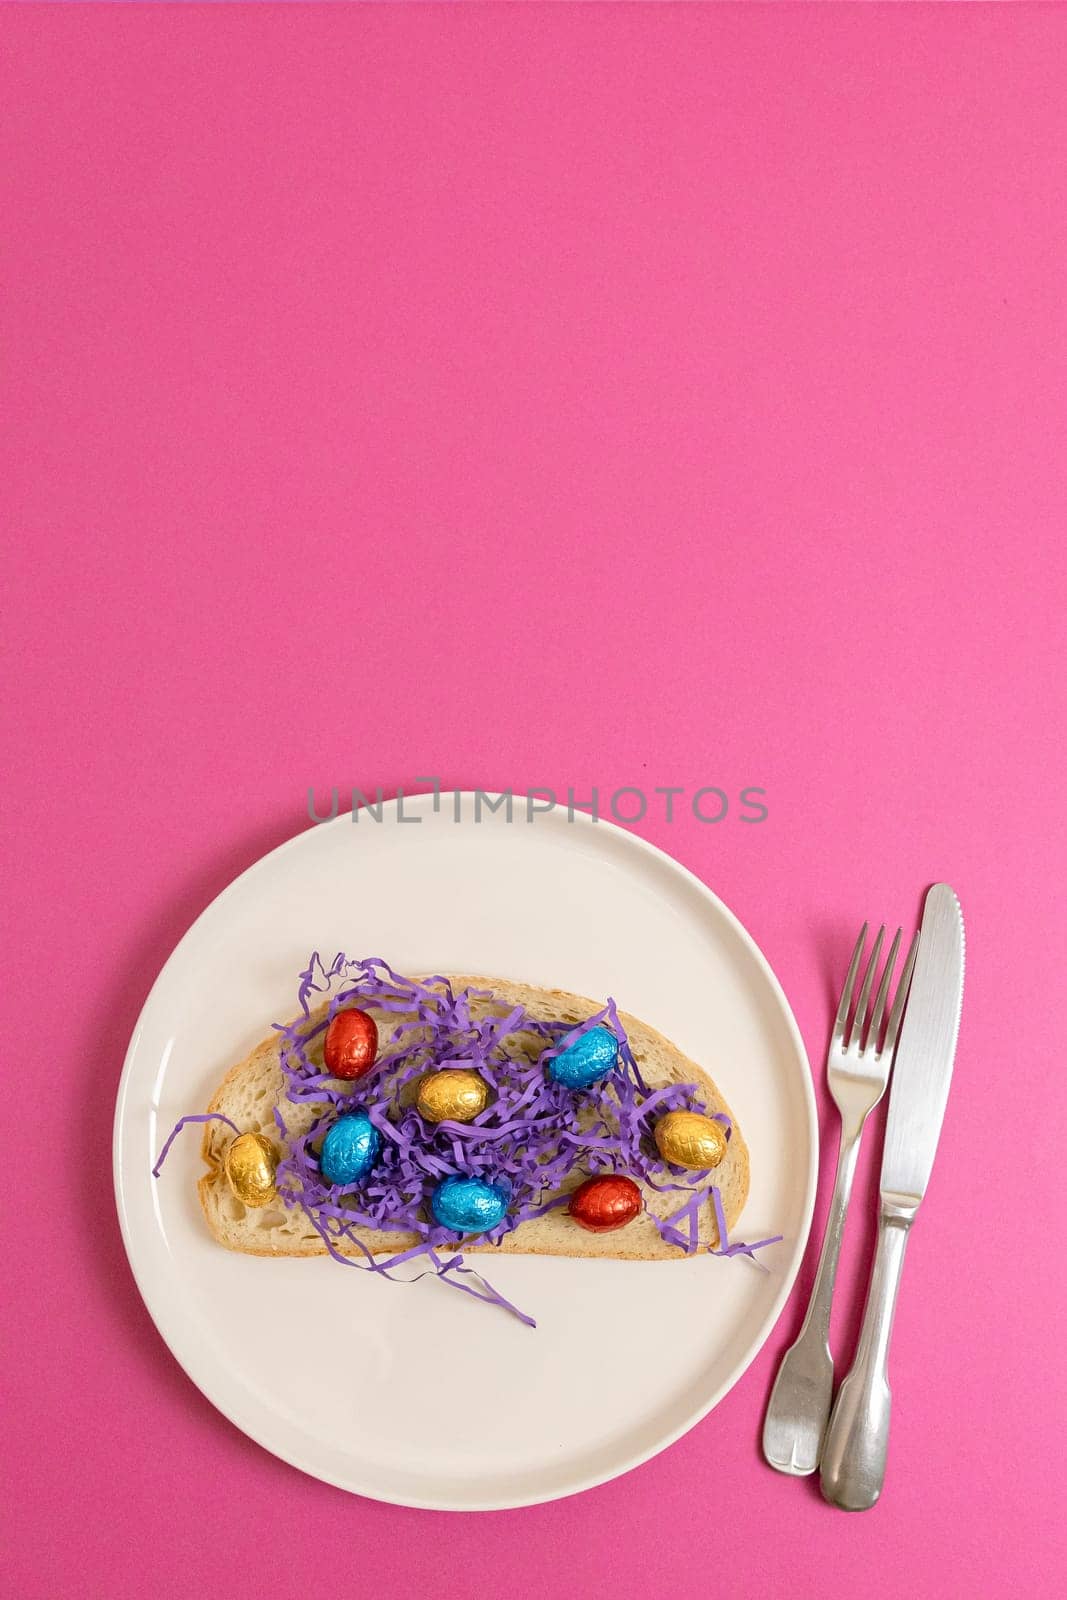 One sandwich with decorative lilac paper hay with chocolate Easter eggs in shiny multi-colored wrappers on a tray with a fork and knife lie from below on a pink background with copy space on top, flat lay close-up. Creative Easter food concept.